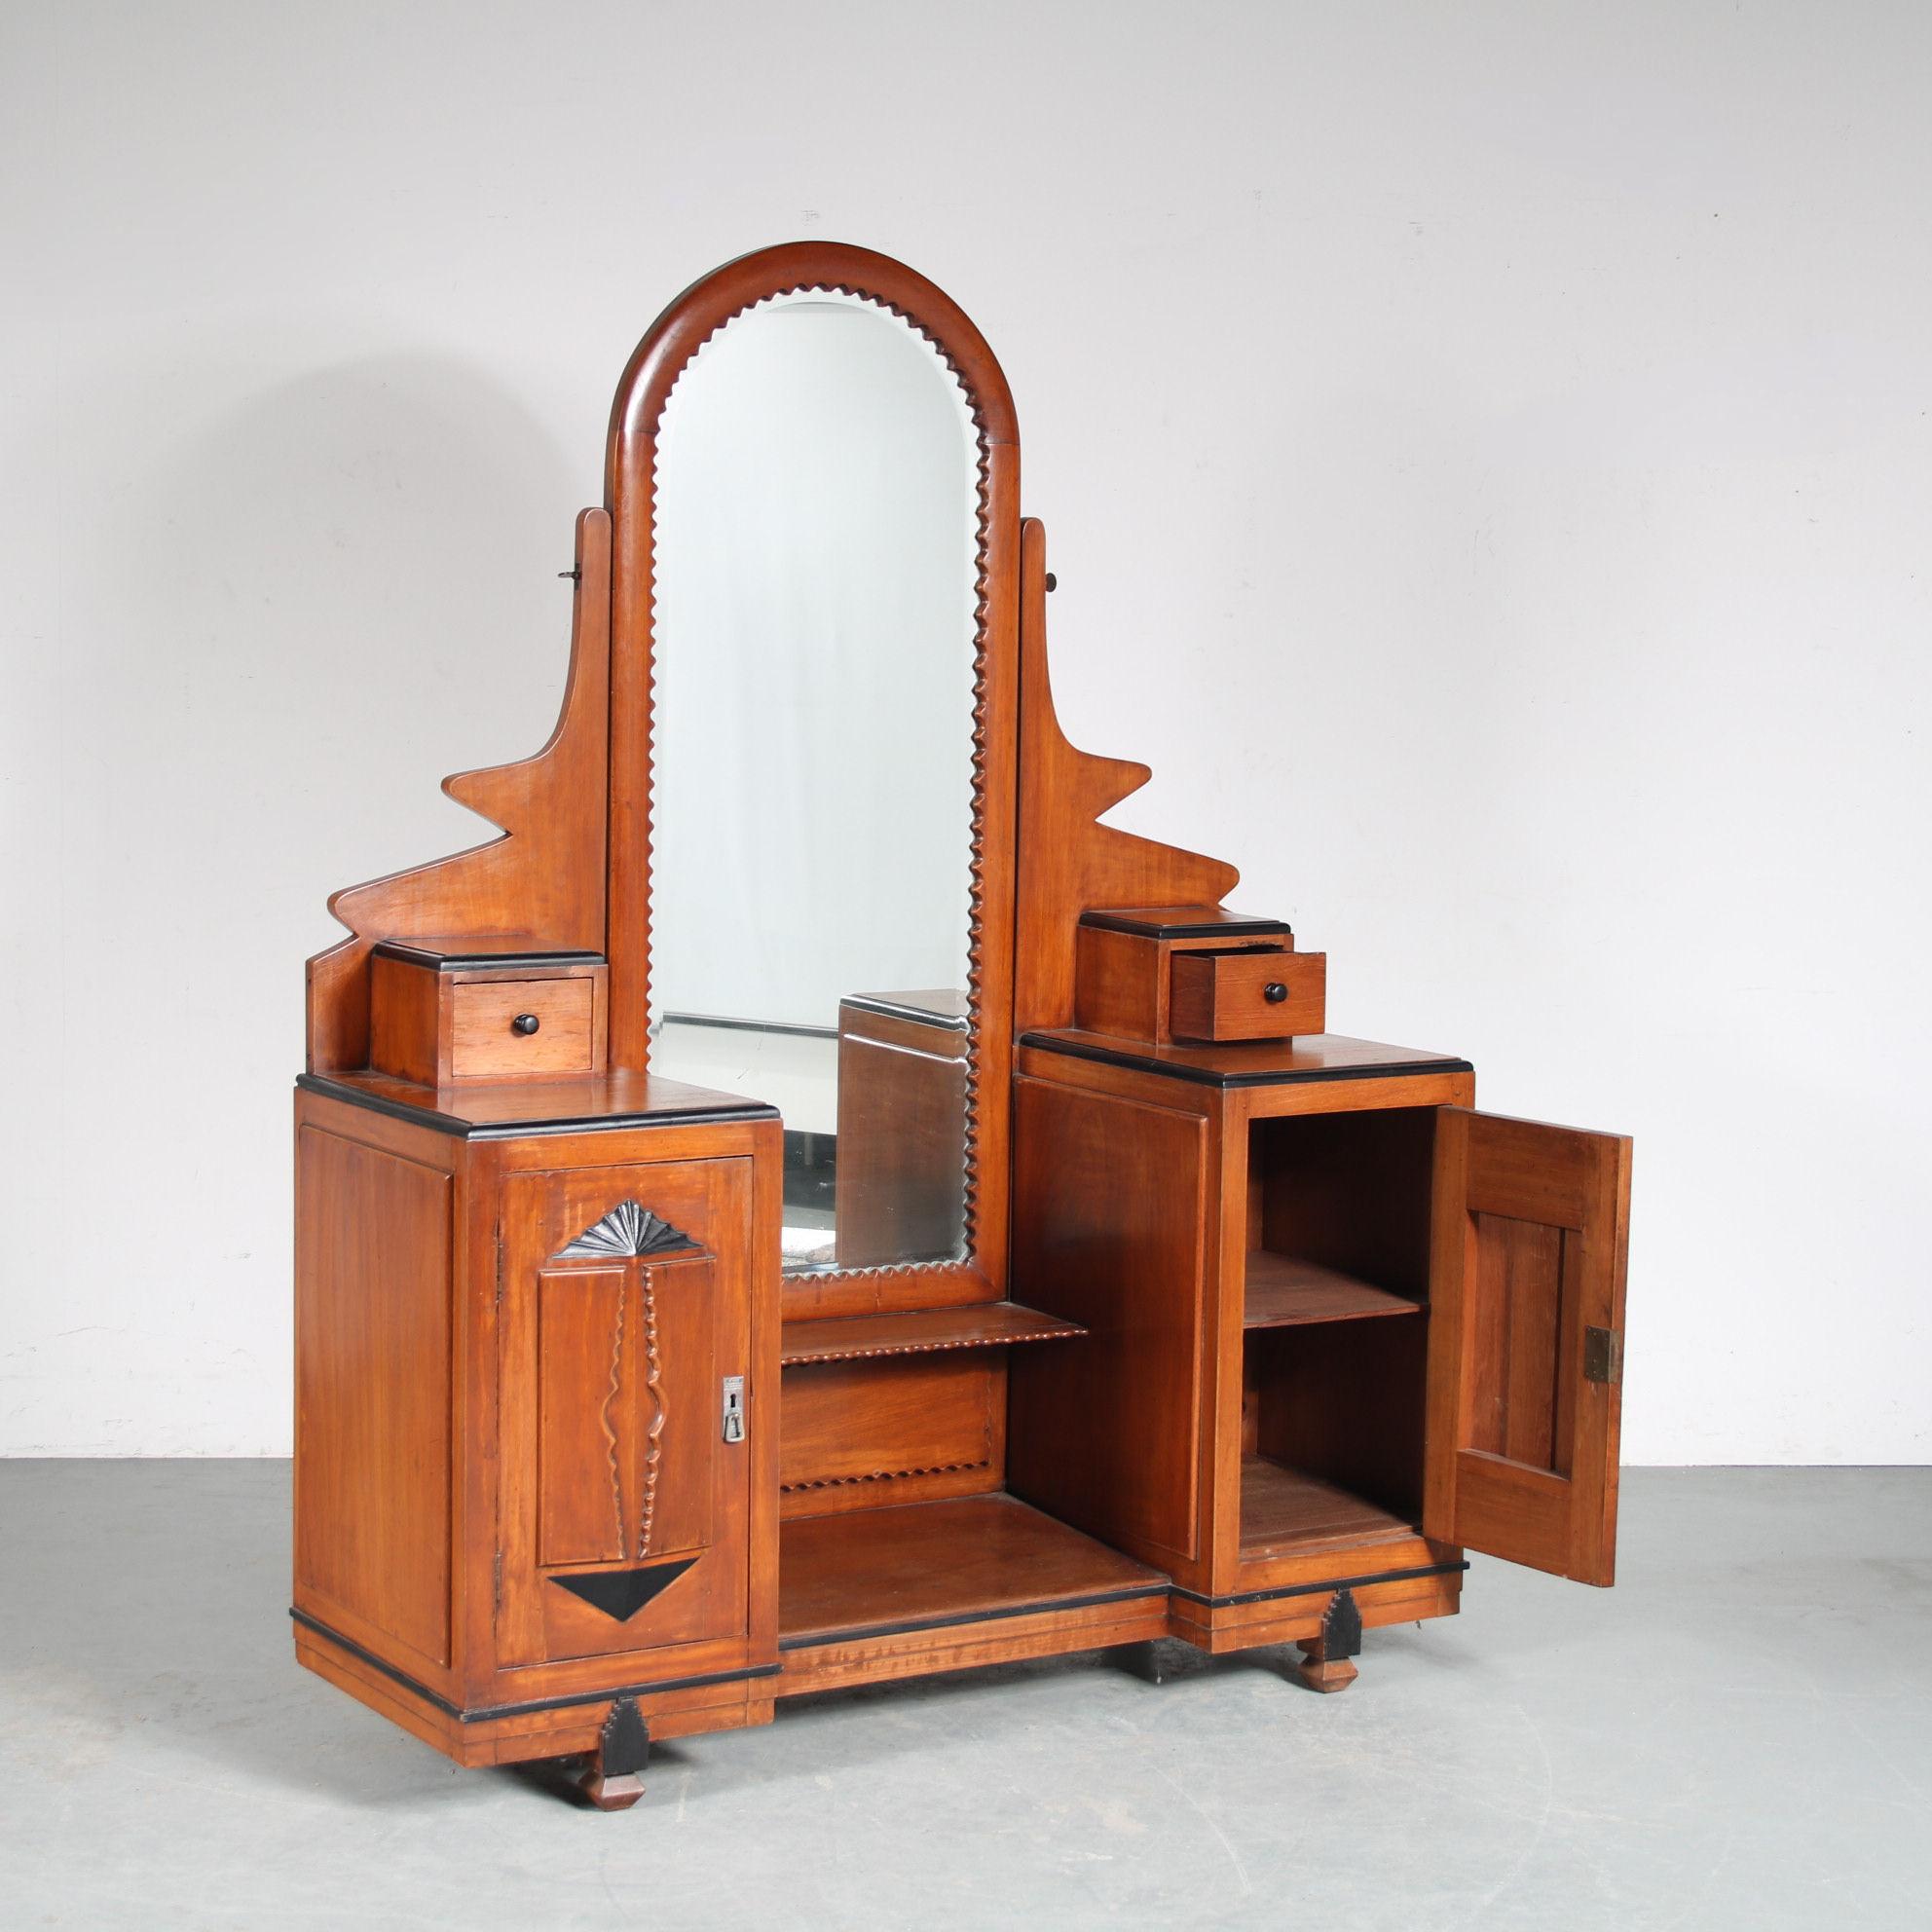 Indonesian Colonial Dressing Table in Amsterdam School Style, Indonesia, 1920 For Sale